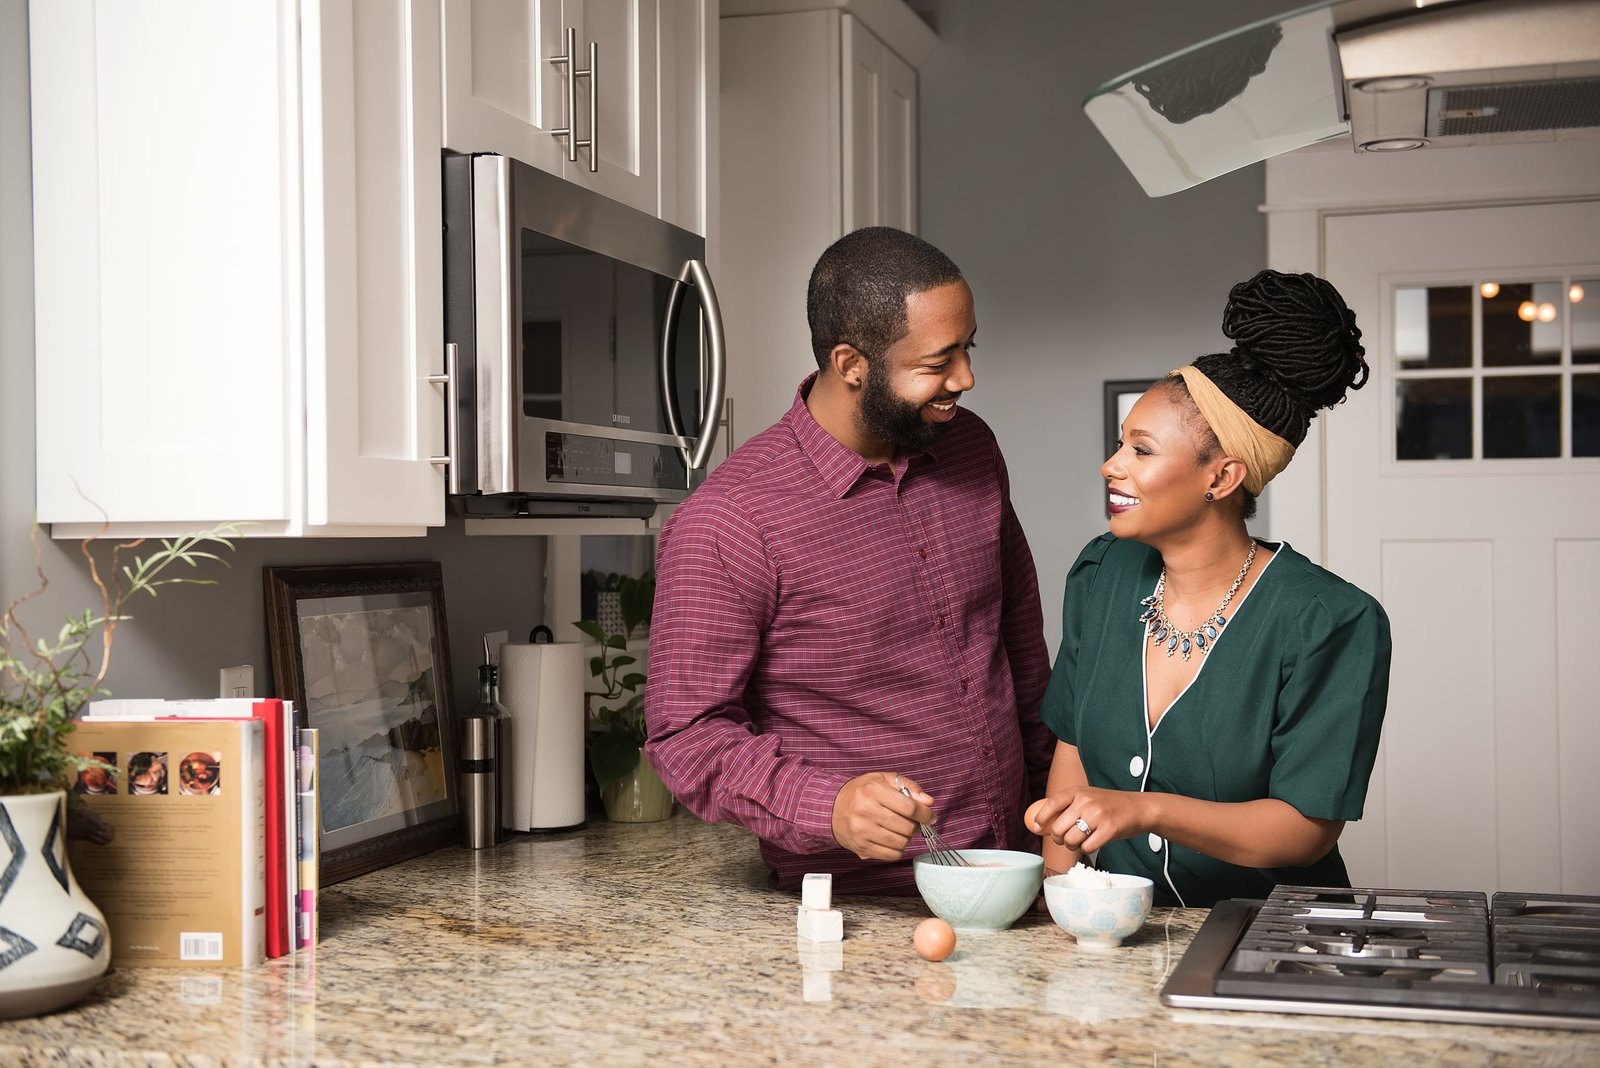 Couple putting ingredients together to bake cookies during the lifestyle photos